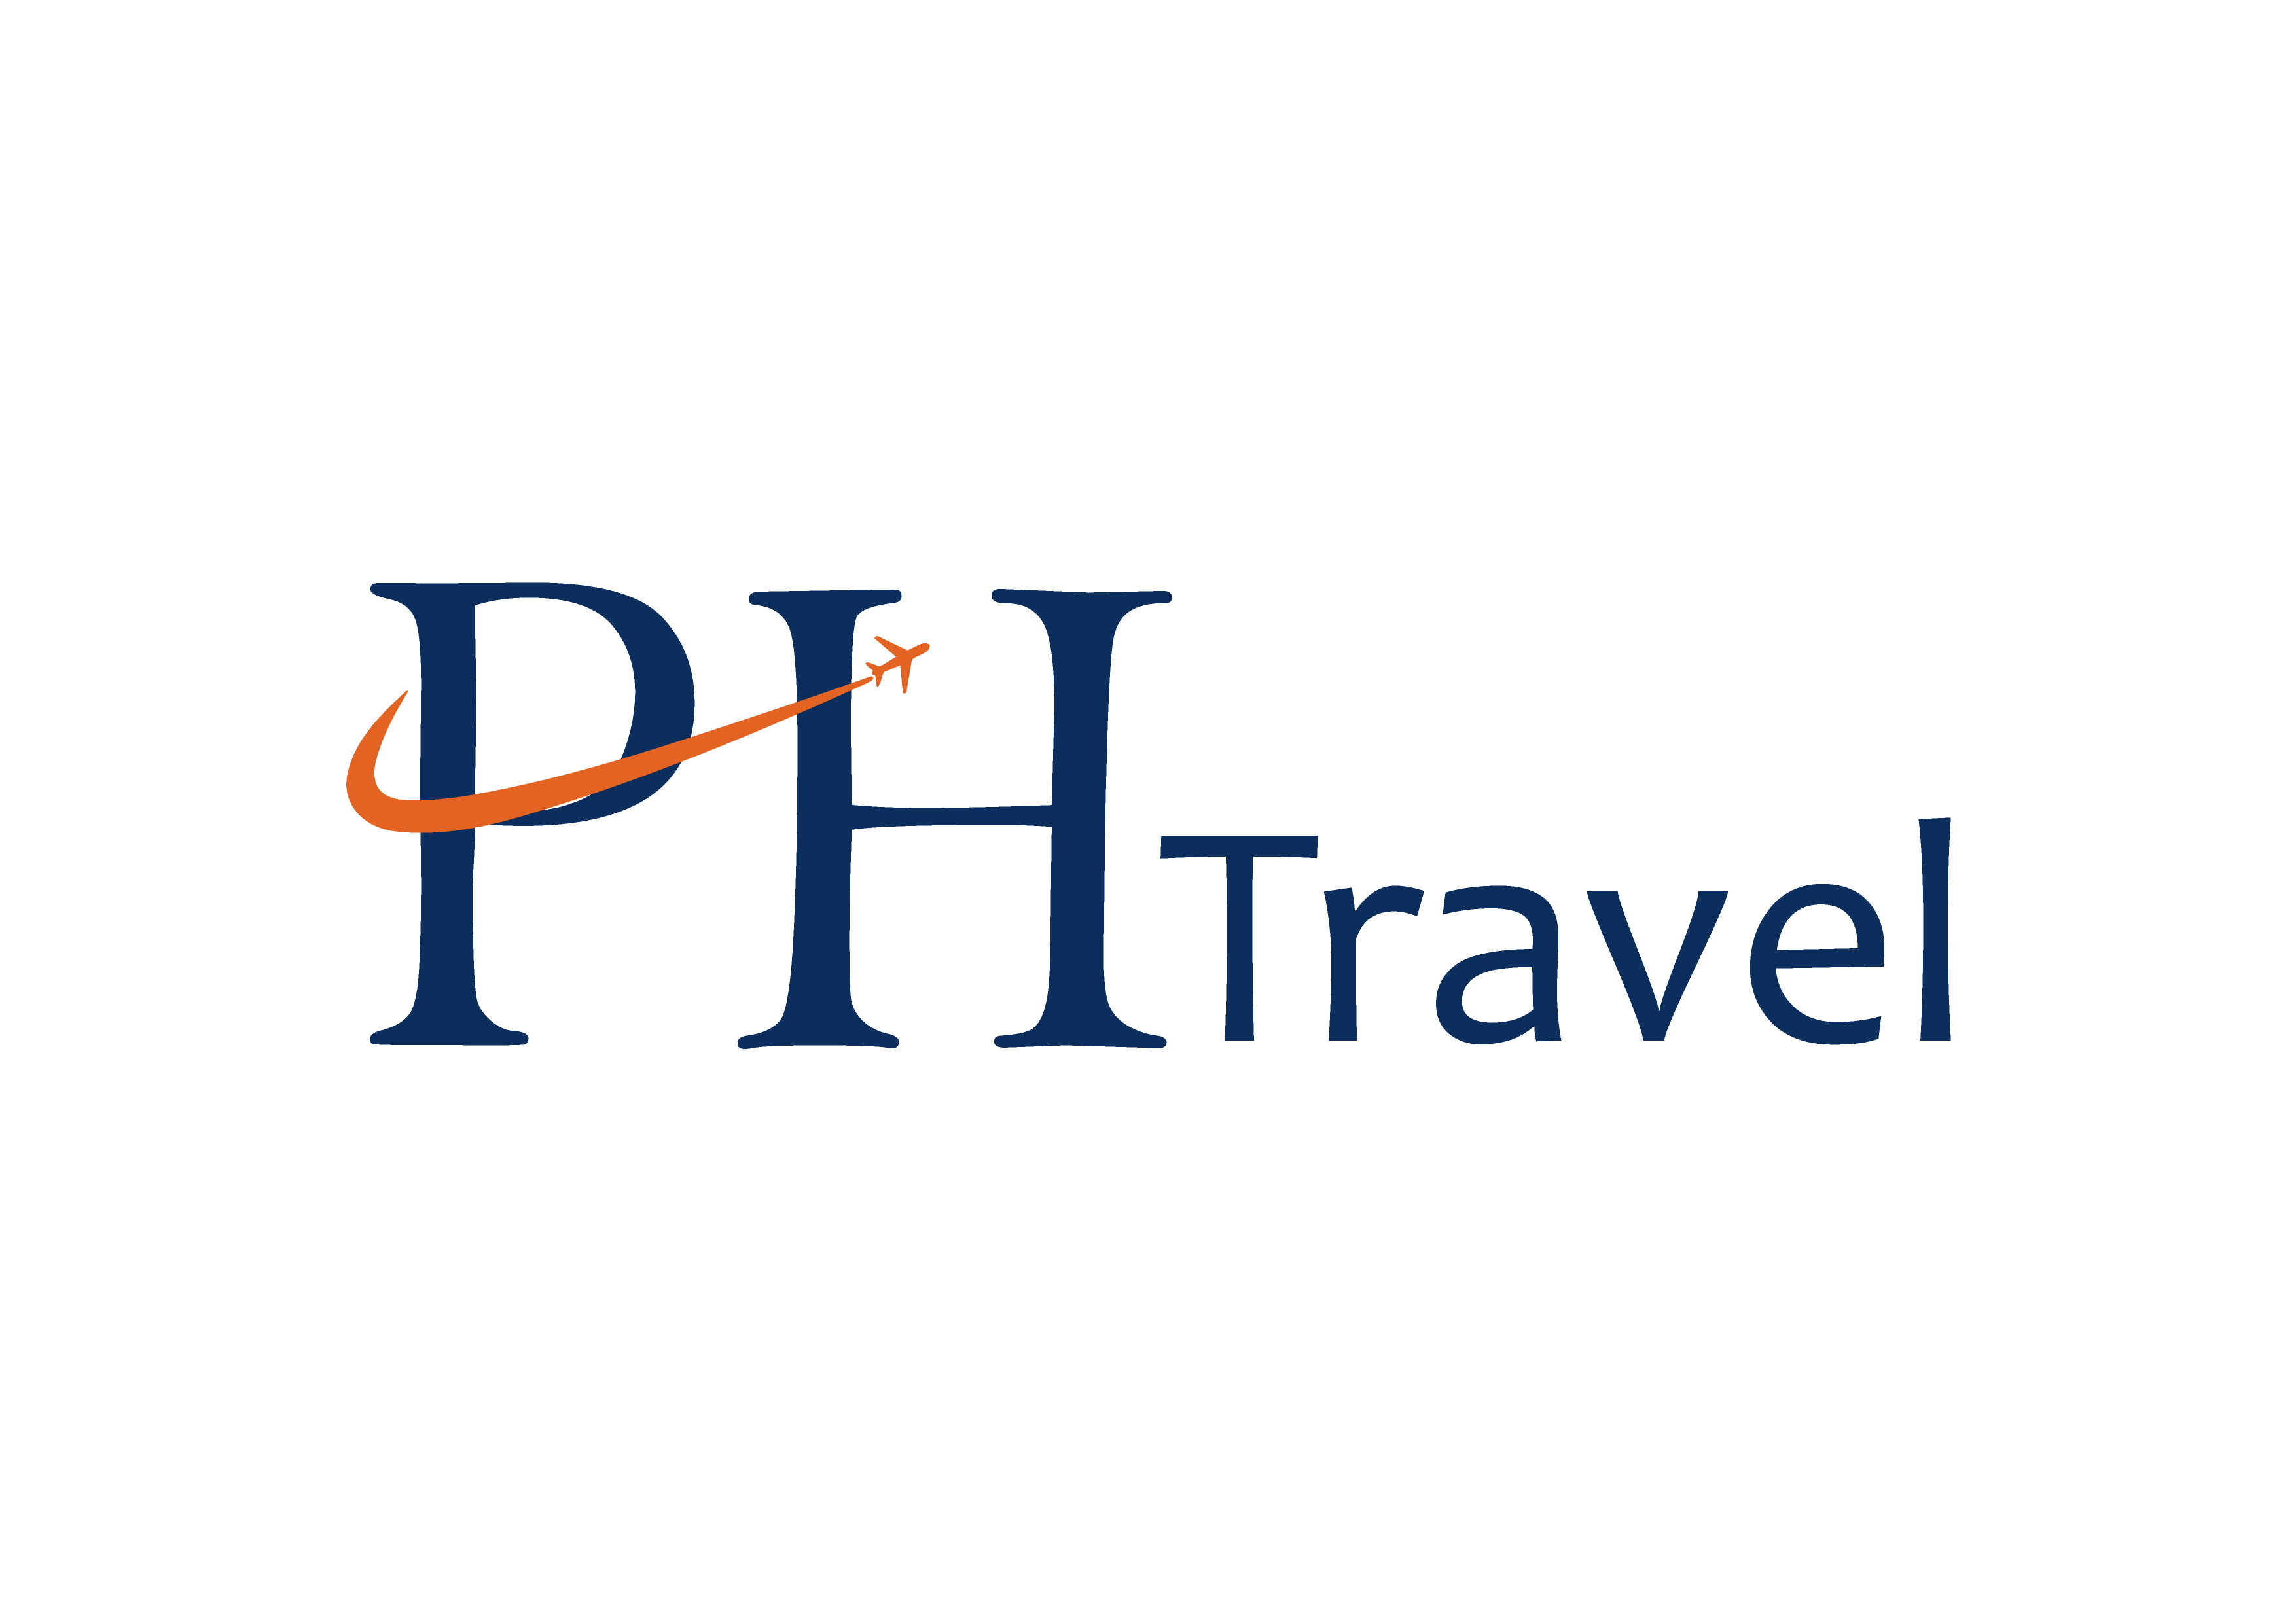 PH Travel - Hydrabad from GB of Travel and Tourism